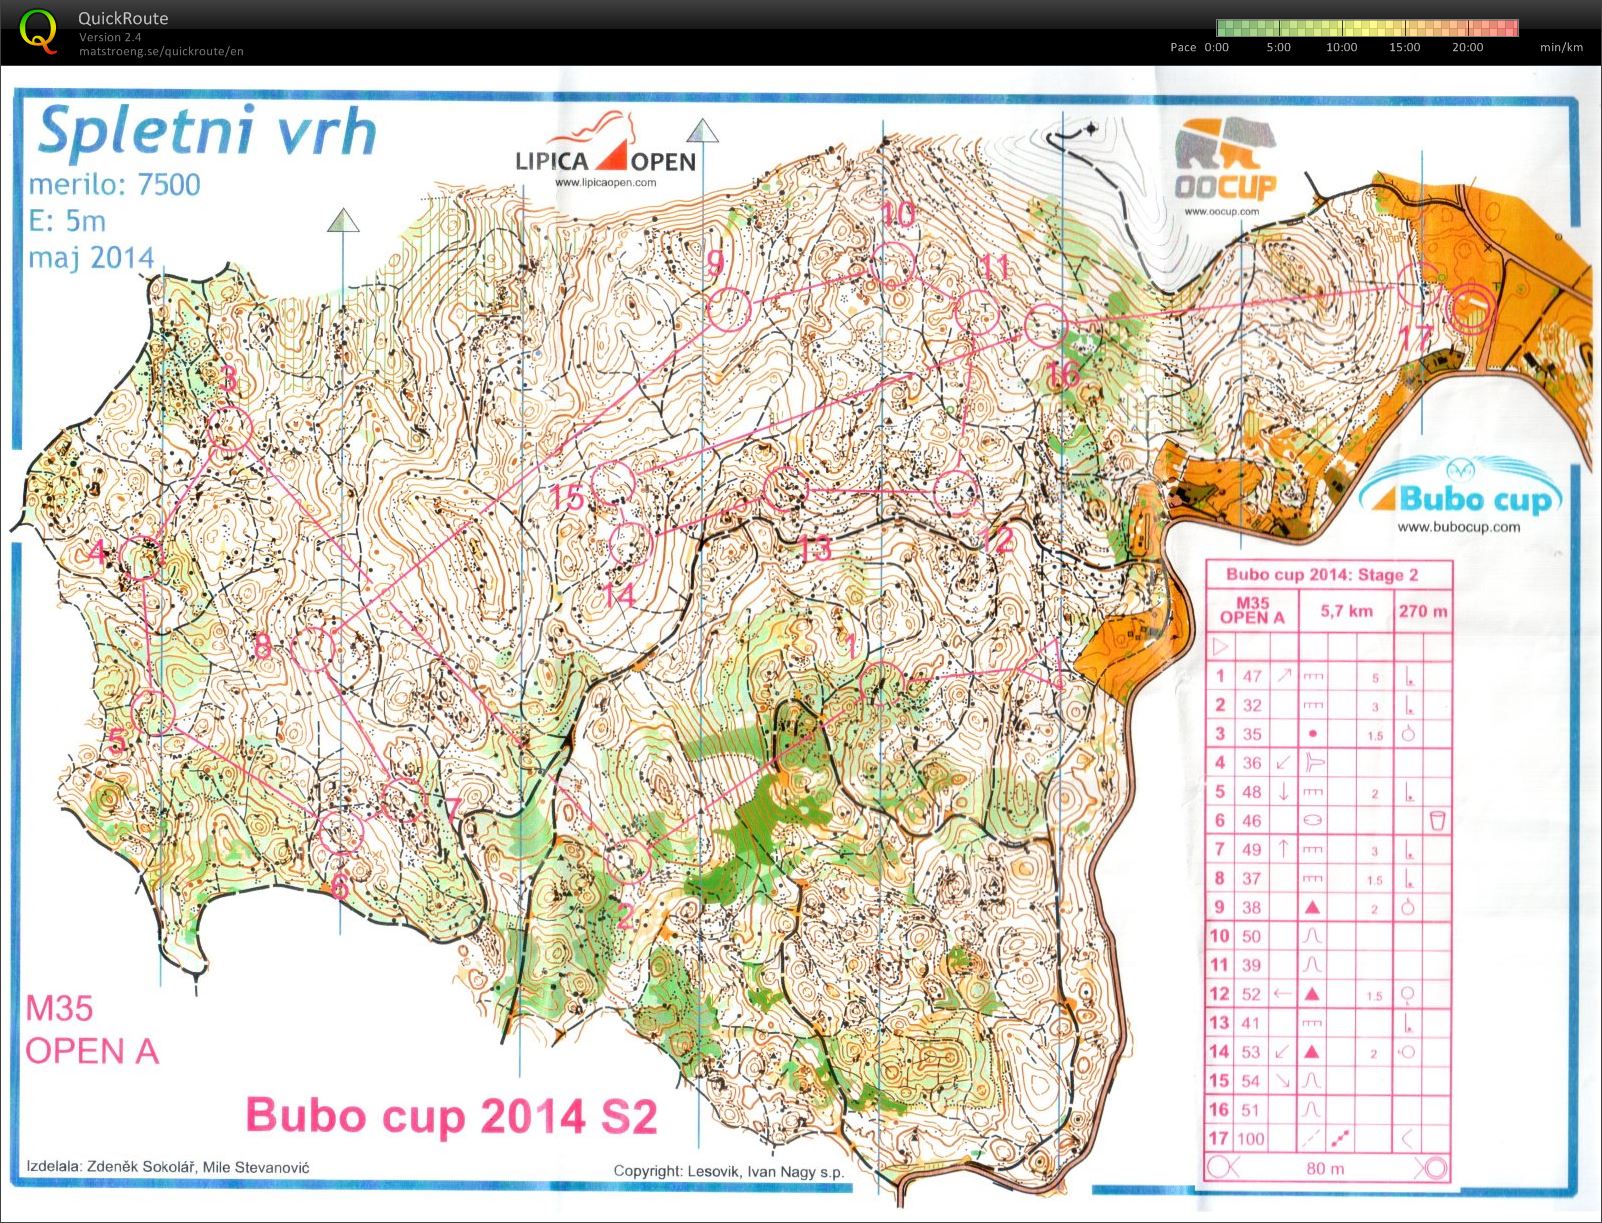 Bubo cup (stage 2) (2014-07-25)